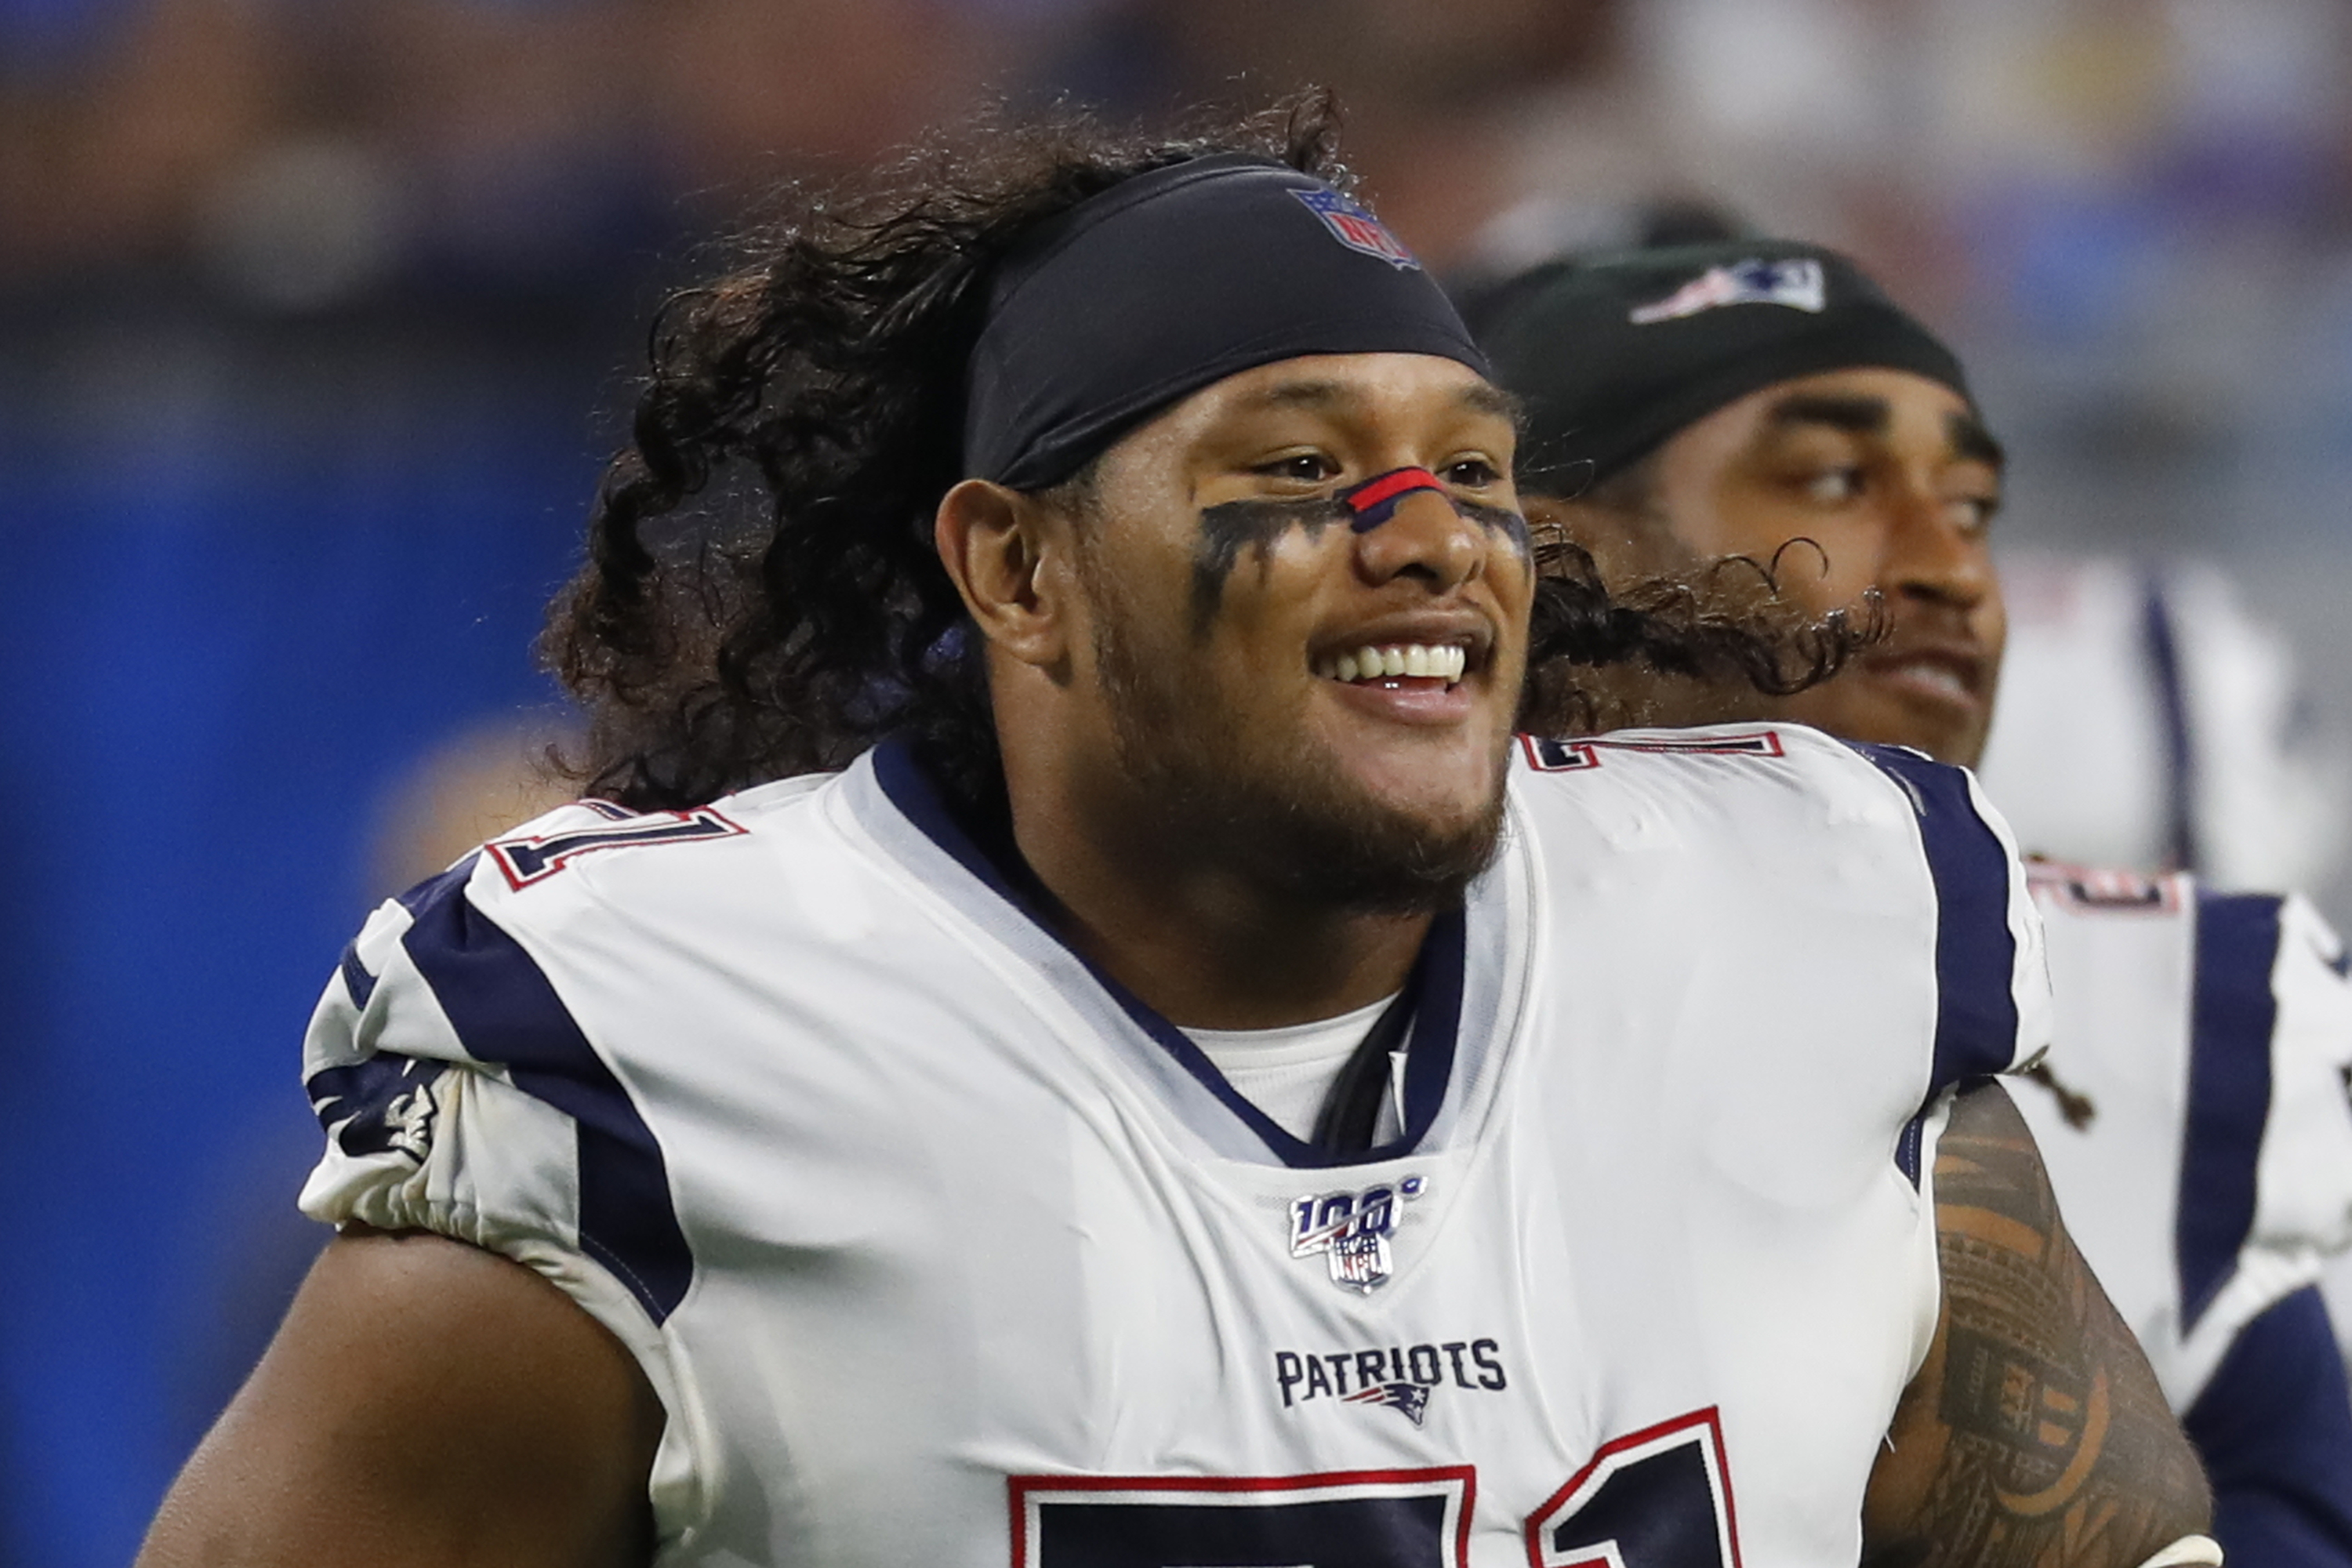 Nfl Free Agency 2021 Giants Sign Ex Patriots Dl Danny Shelton To One Year Deal Report Masslive Com